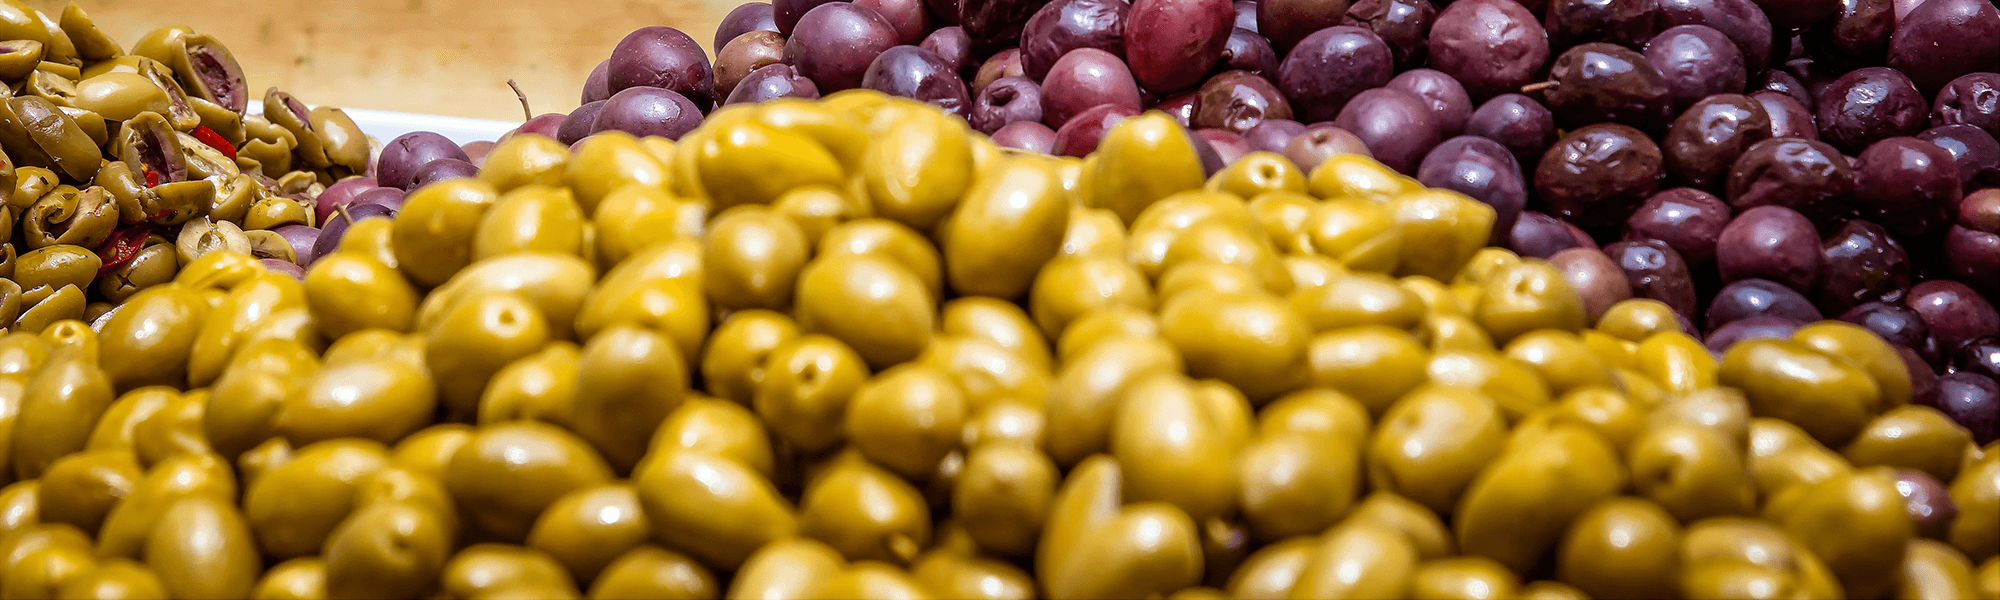 Photograph of Olives